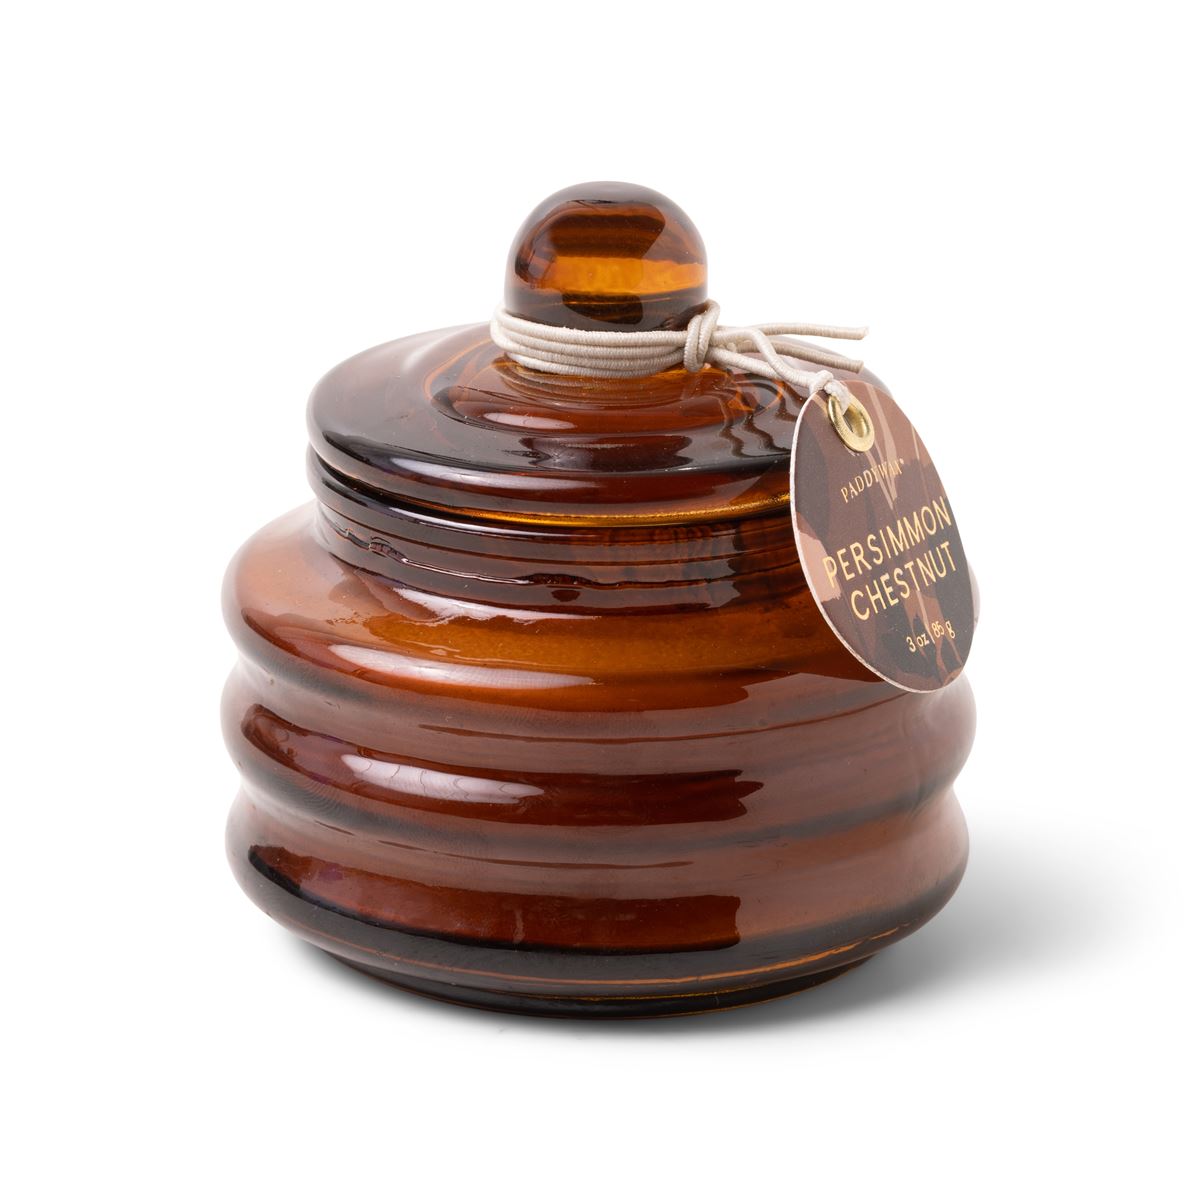 Beam 3oz Amber Small Glass Vessel and Lid - Persimmon Chestnut